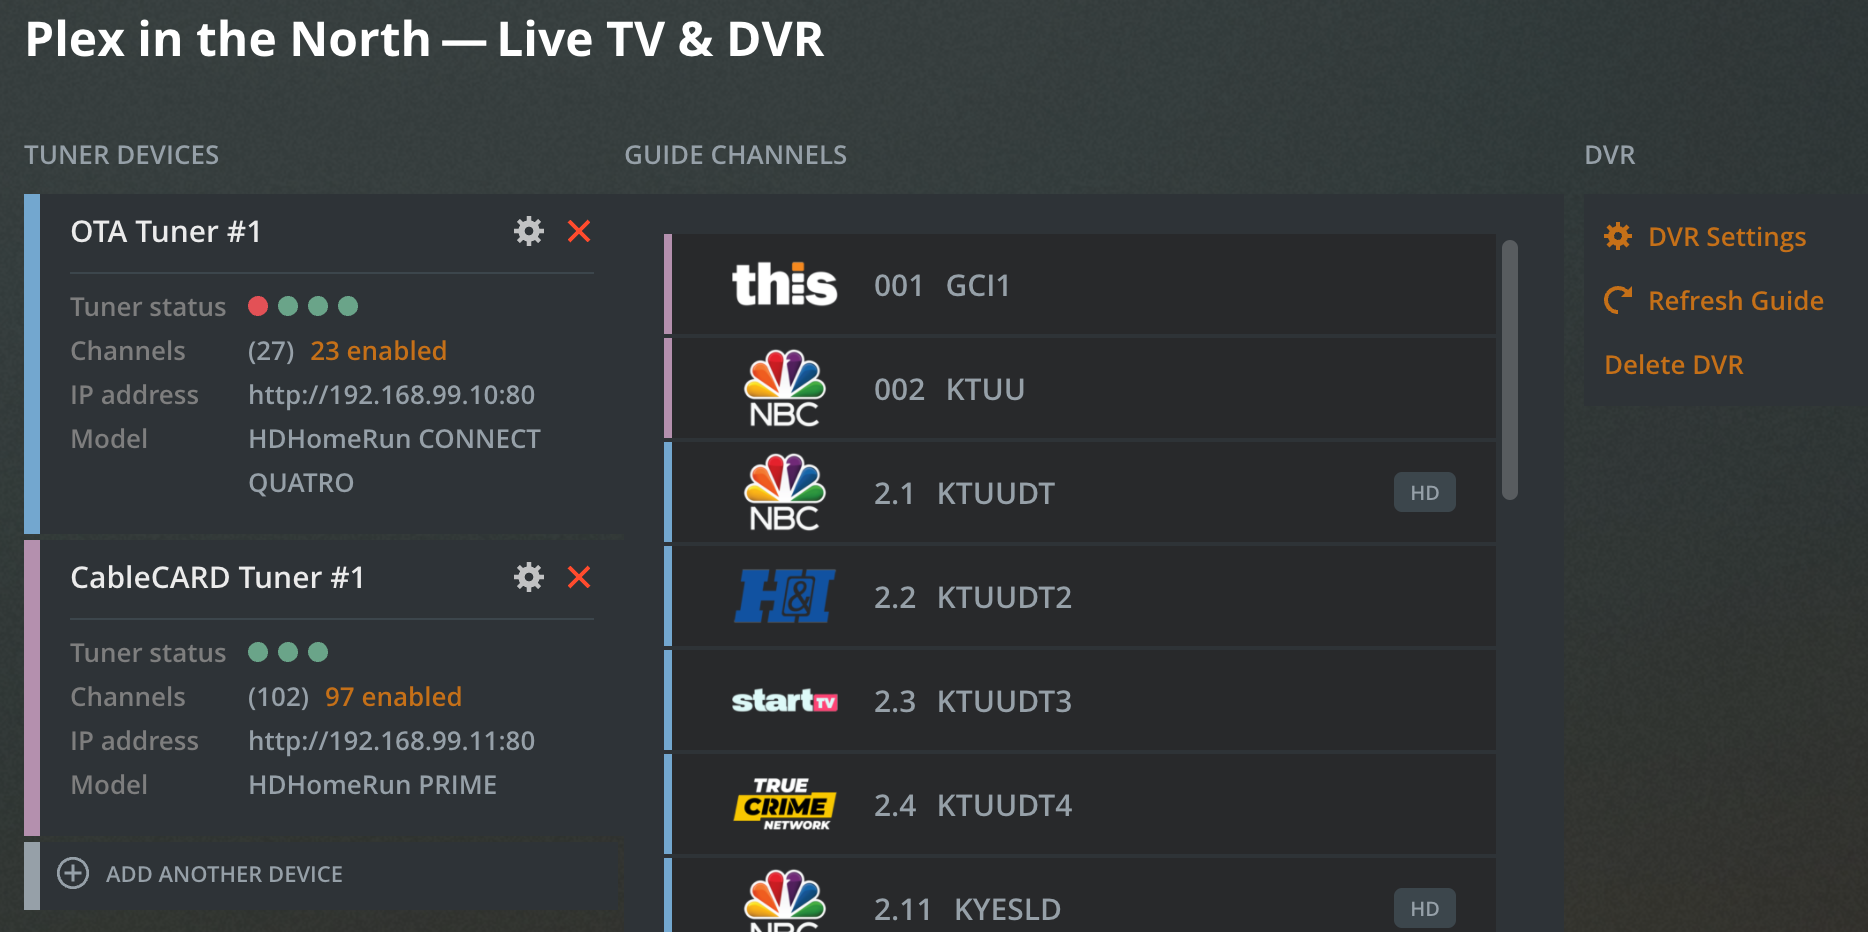 Once a DVR is set up, you can manage it all in one place. Refresh the EPG, manage channel mappings, and access DVR and device settings.